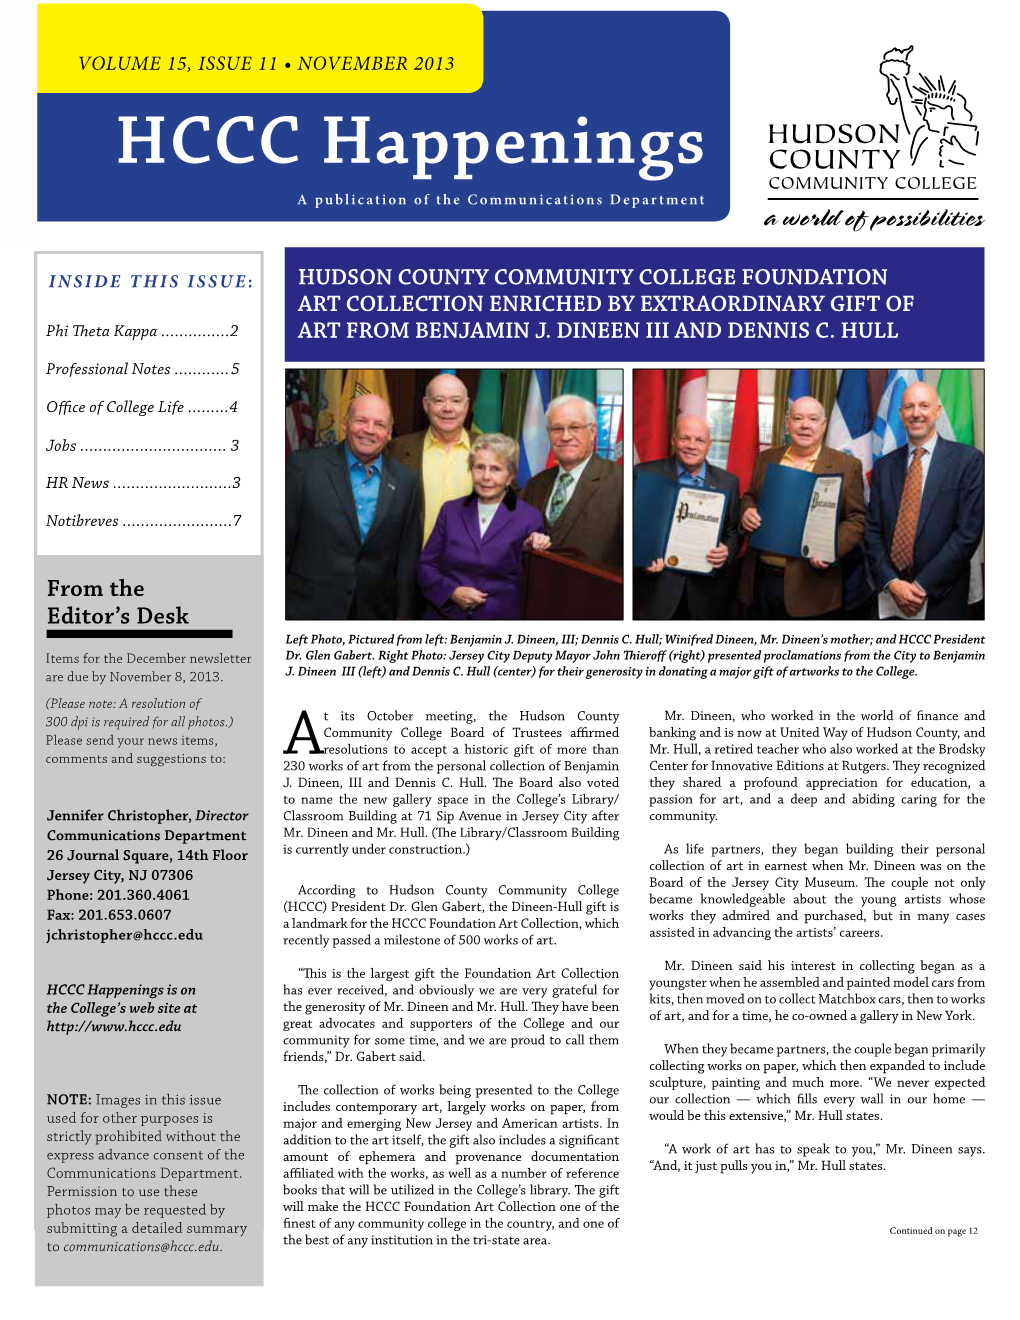 NOVEMBER 2013 HCCC Happenings a Publication of the Communications Department